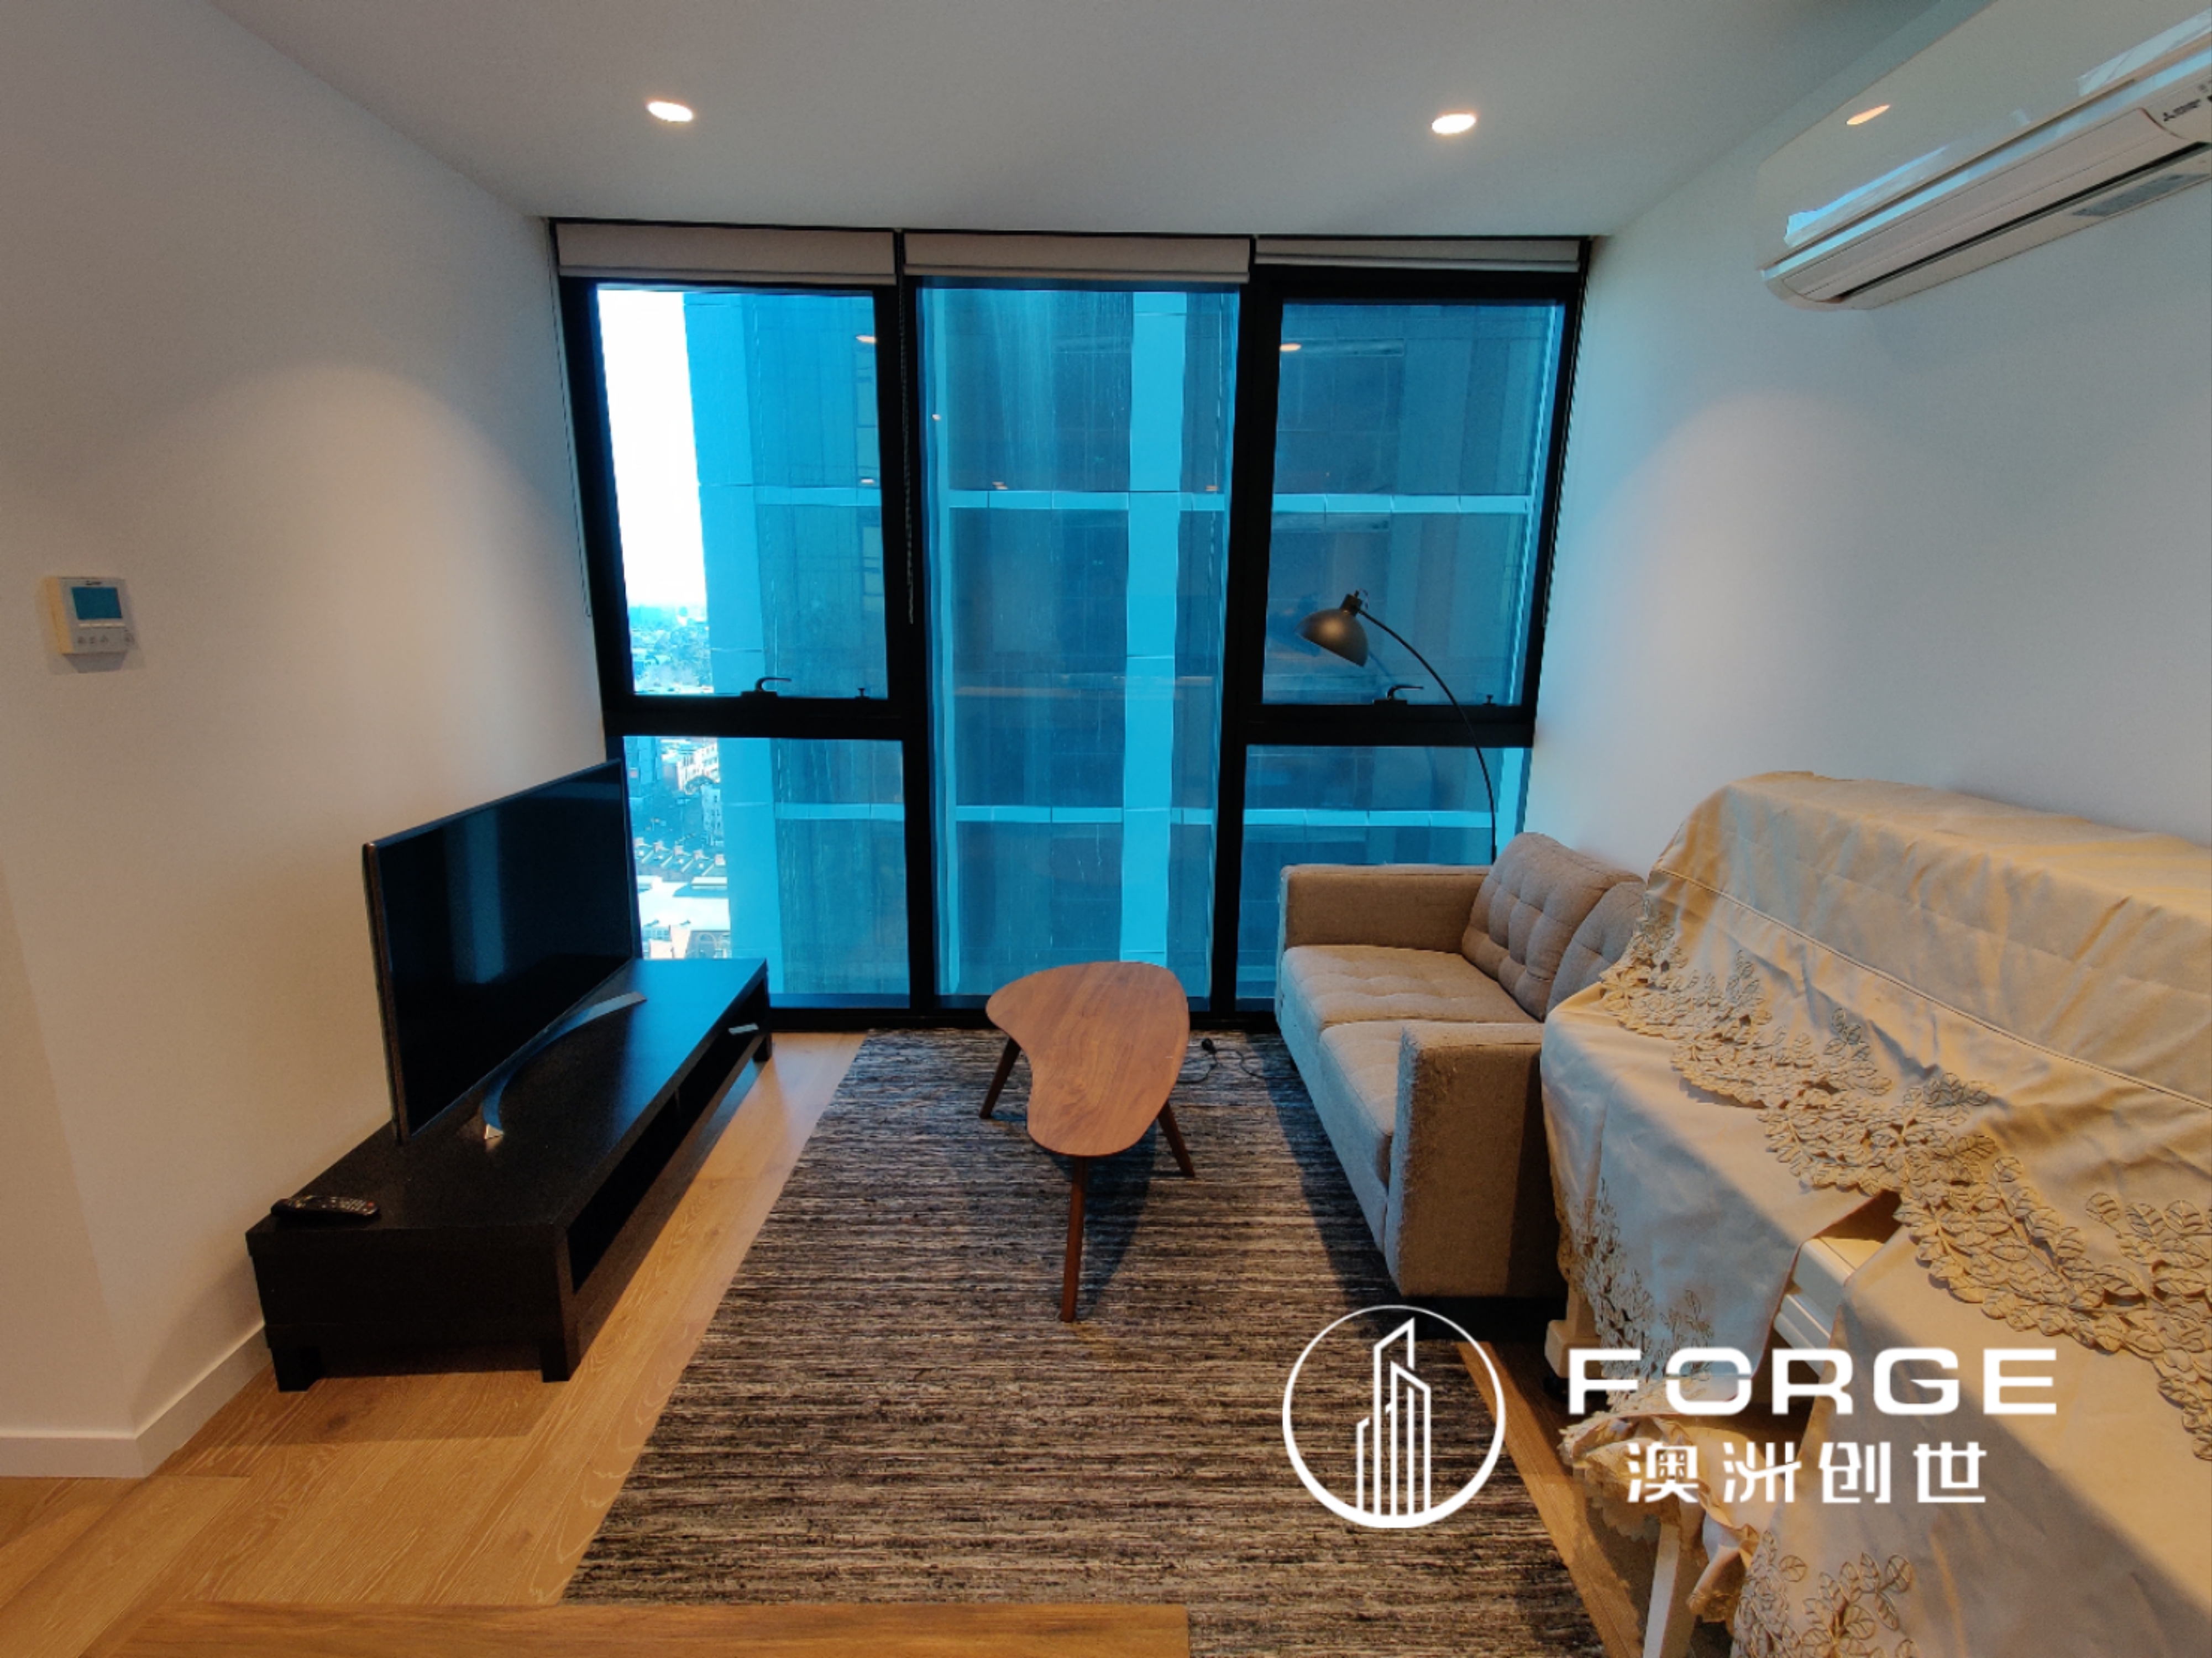 Central CBD Apartment 2 Bedrooms 2 Bathrooms, Fully Furnished Well Maintained. Available To Move In Now.